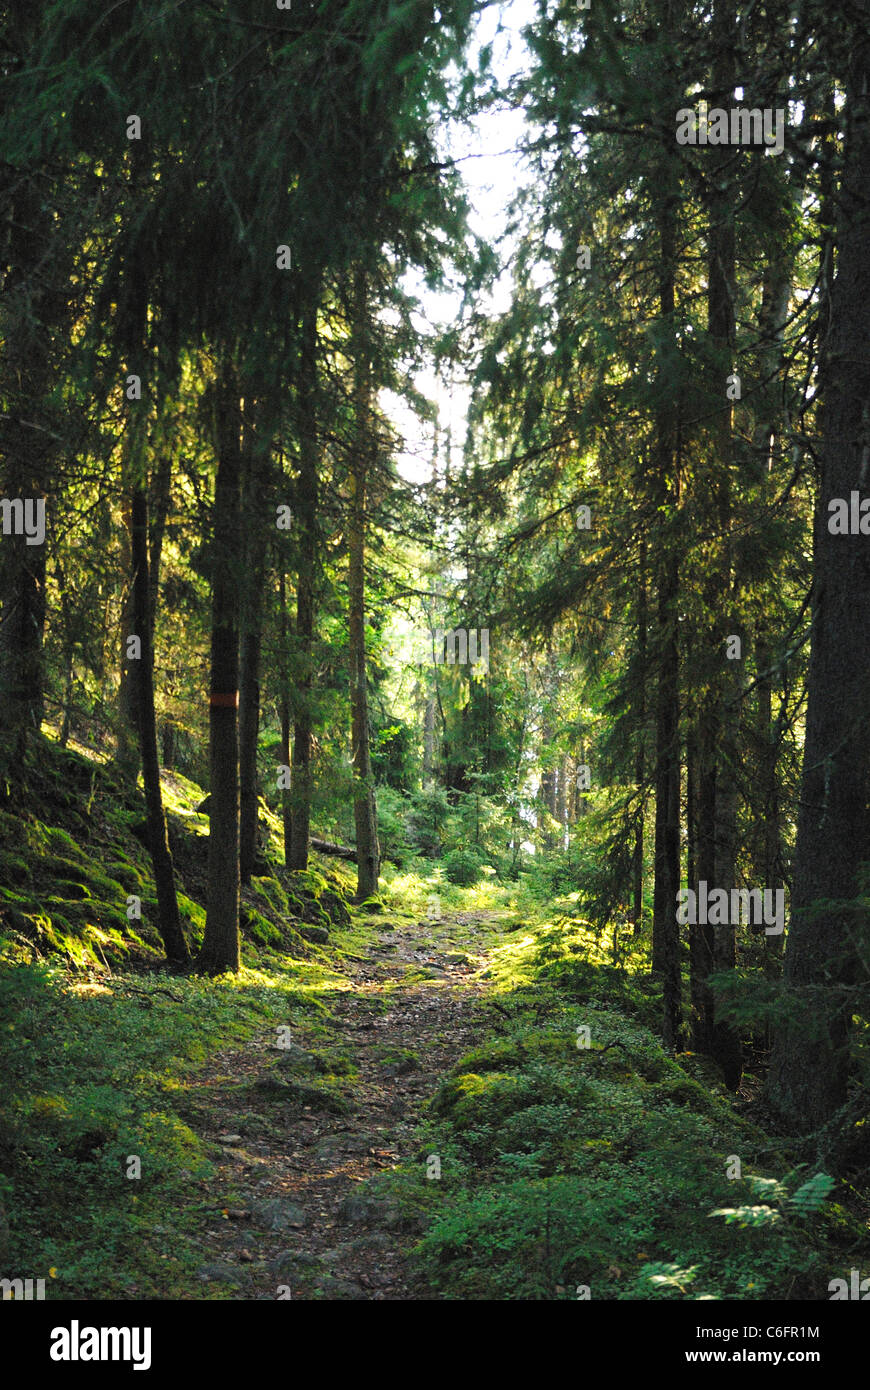 A forest glade in the wilderness of Malingsbo-Kloten Nature Reserve, Sweden Stock Photo